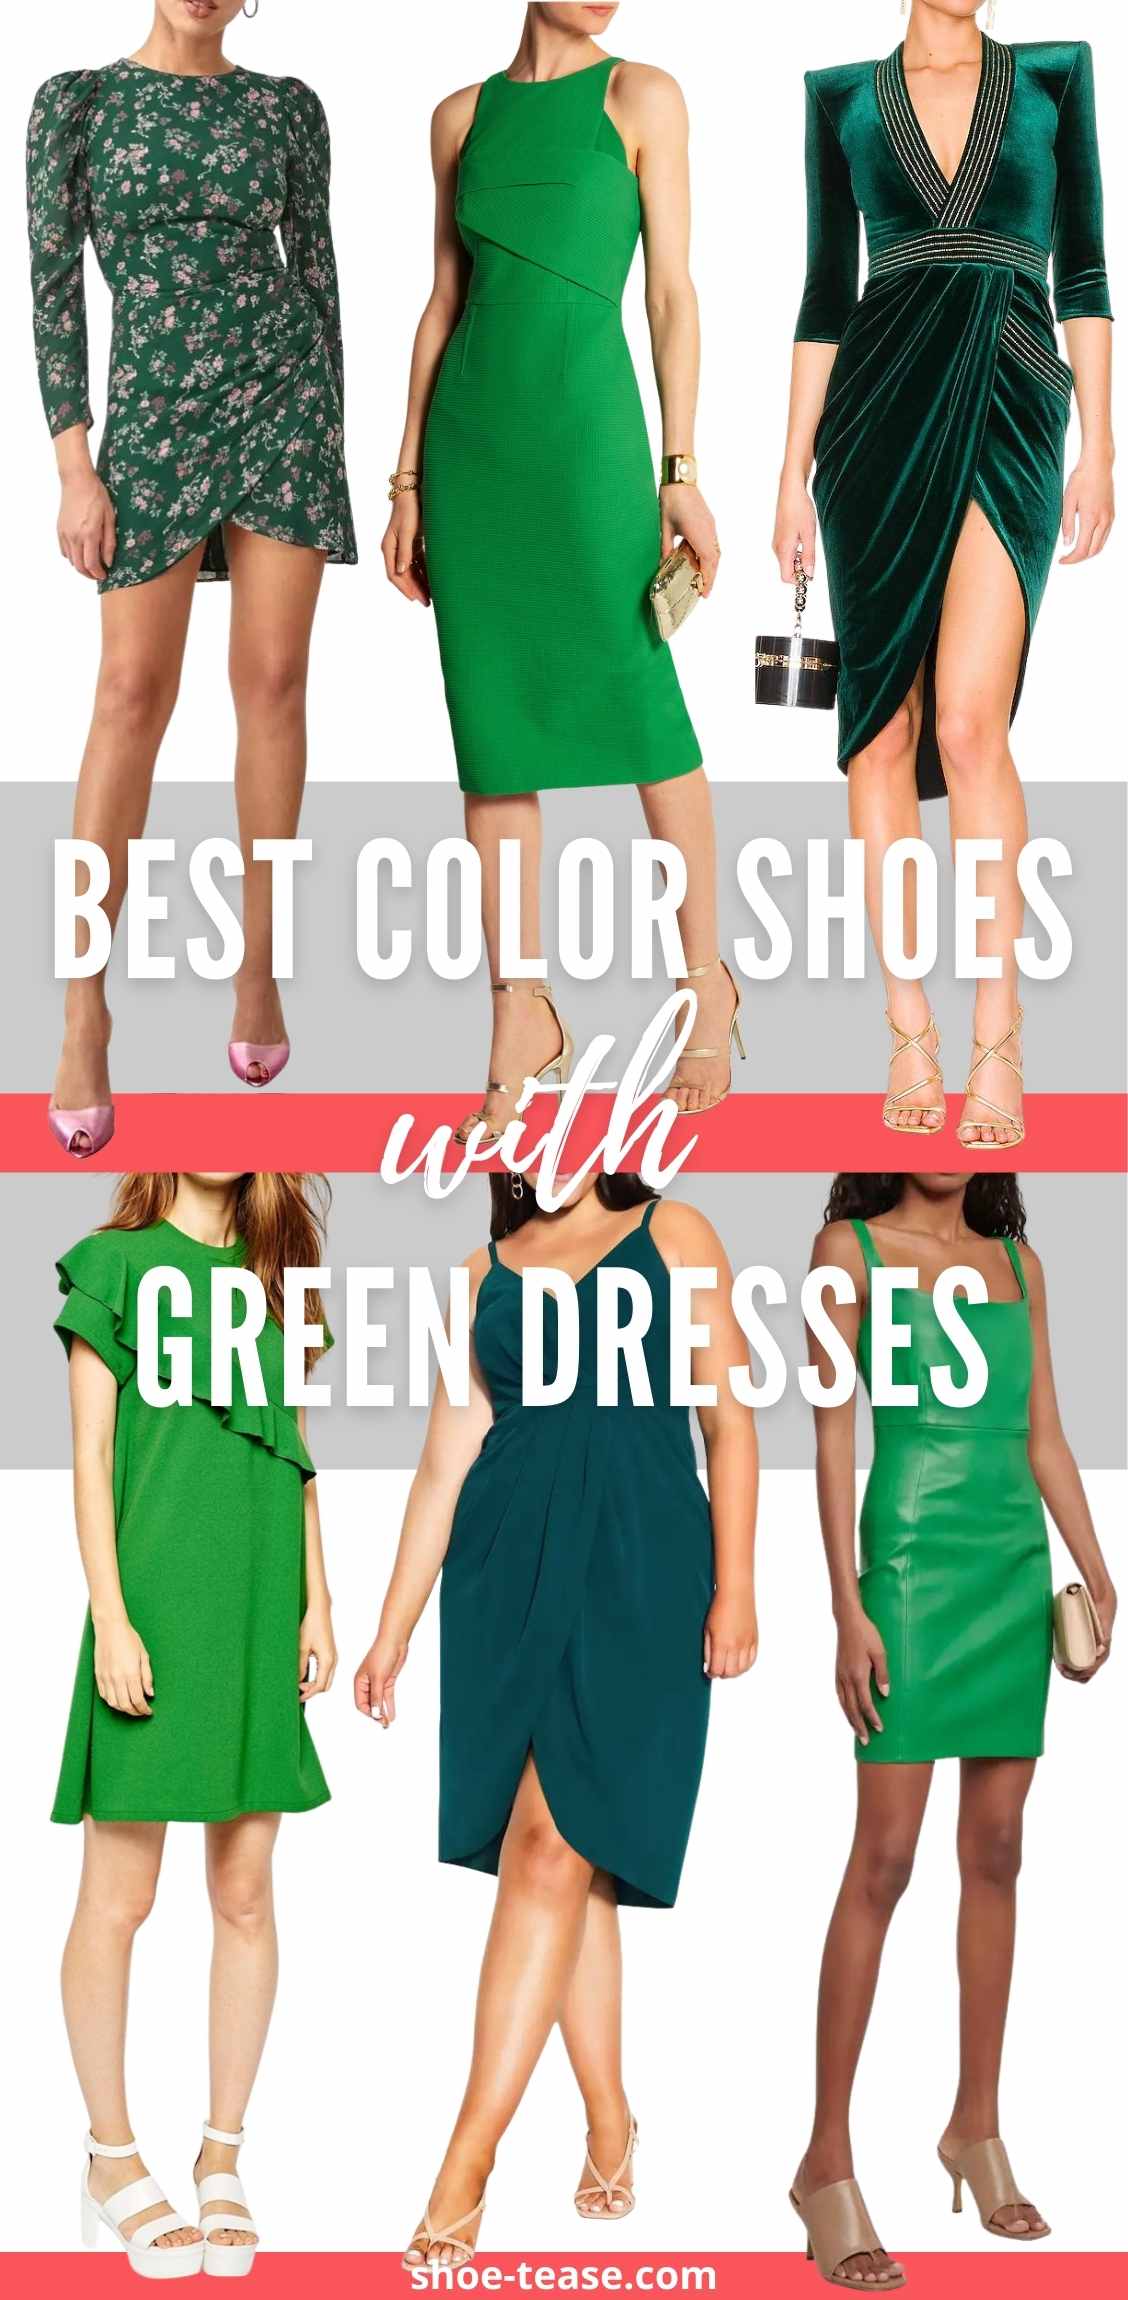 10 Best Shoe Colors To Wear With A Green Dress